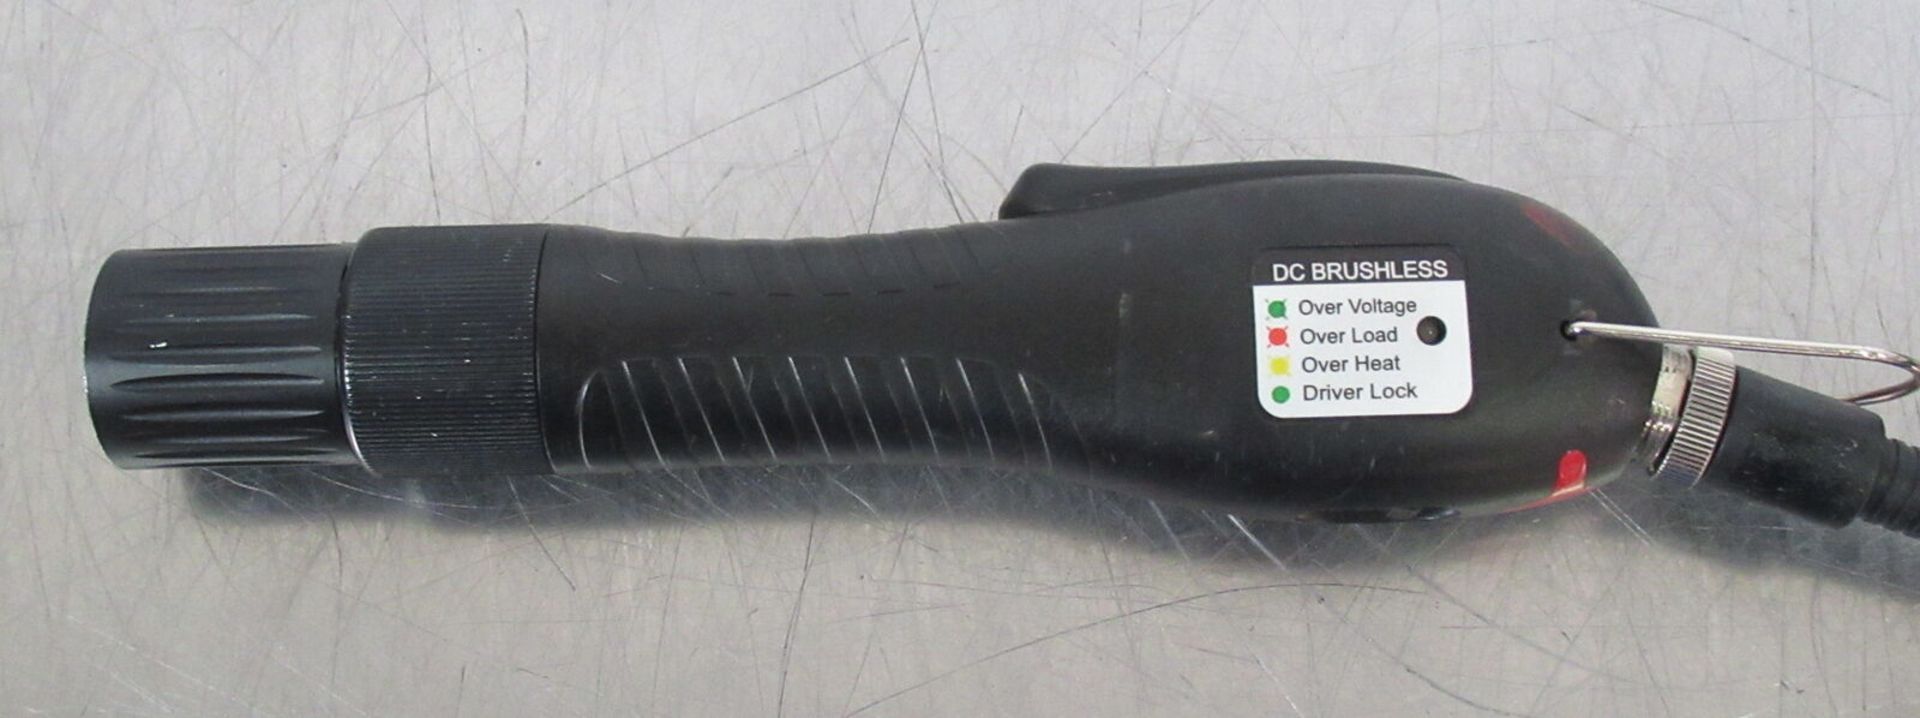 Mountz LF120-A ESD Electric Screwdriver w/ STC-40 Controller - Image 2 of 7